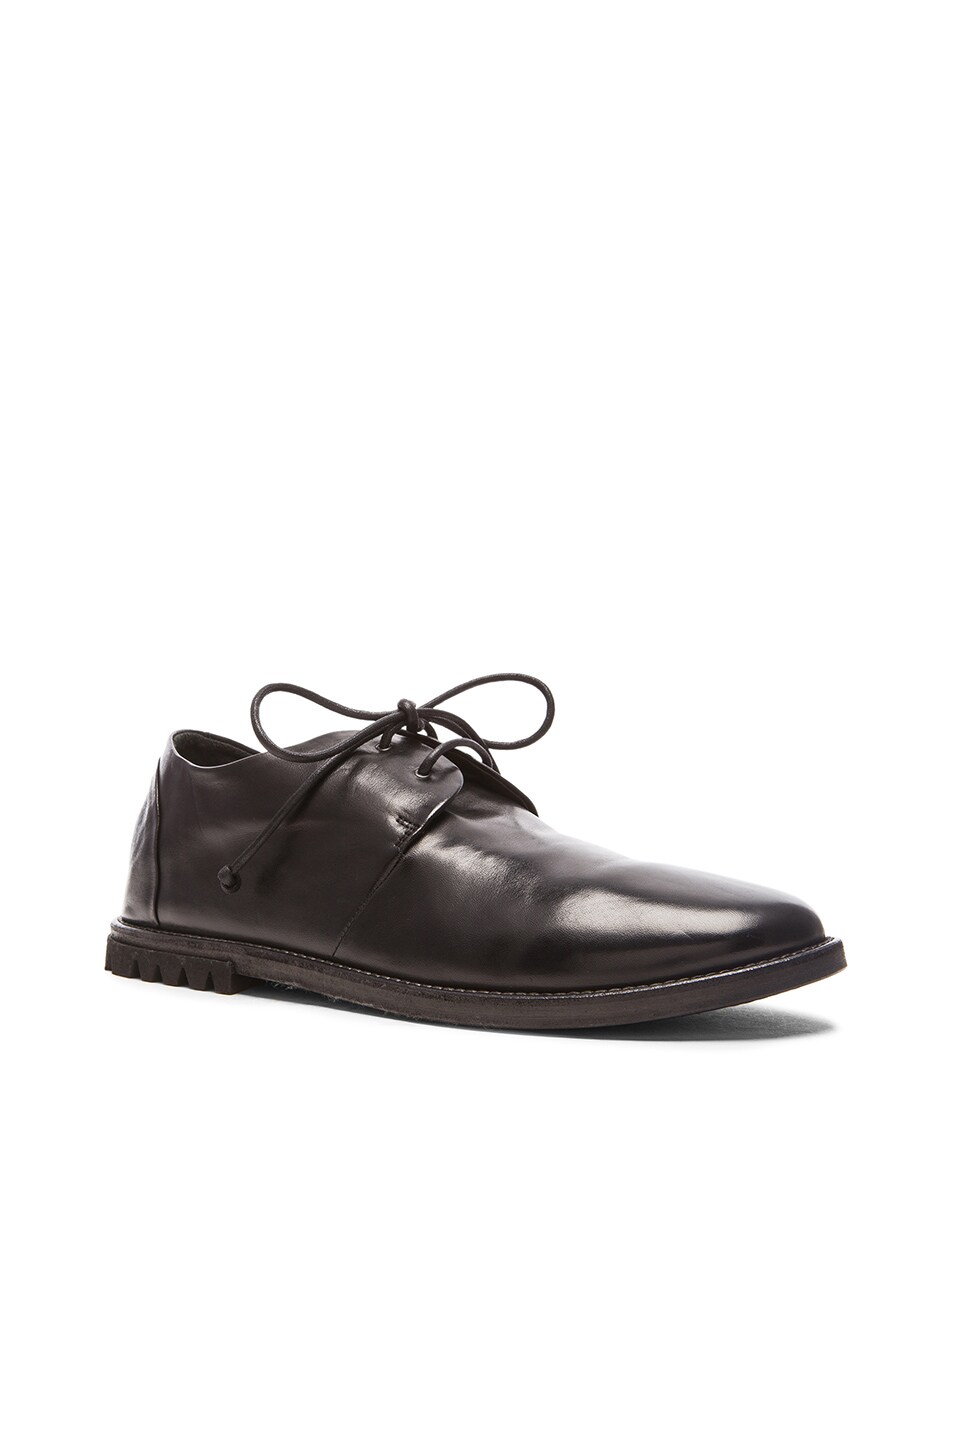 Image 1 of Marsell Lug Sole Leather Dress Shoes in Black